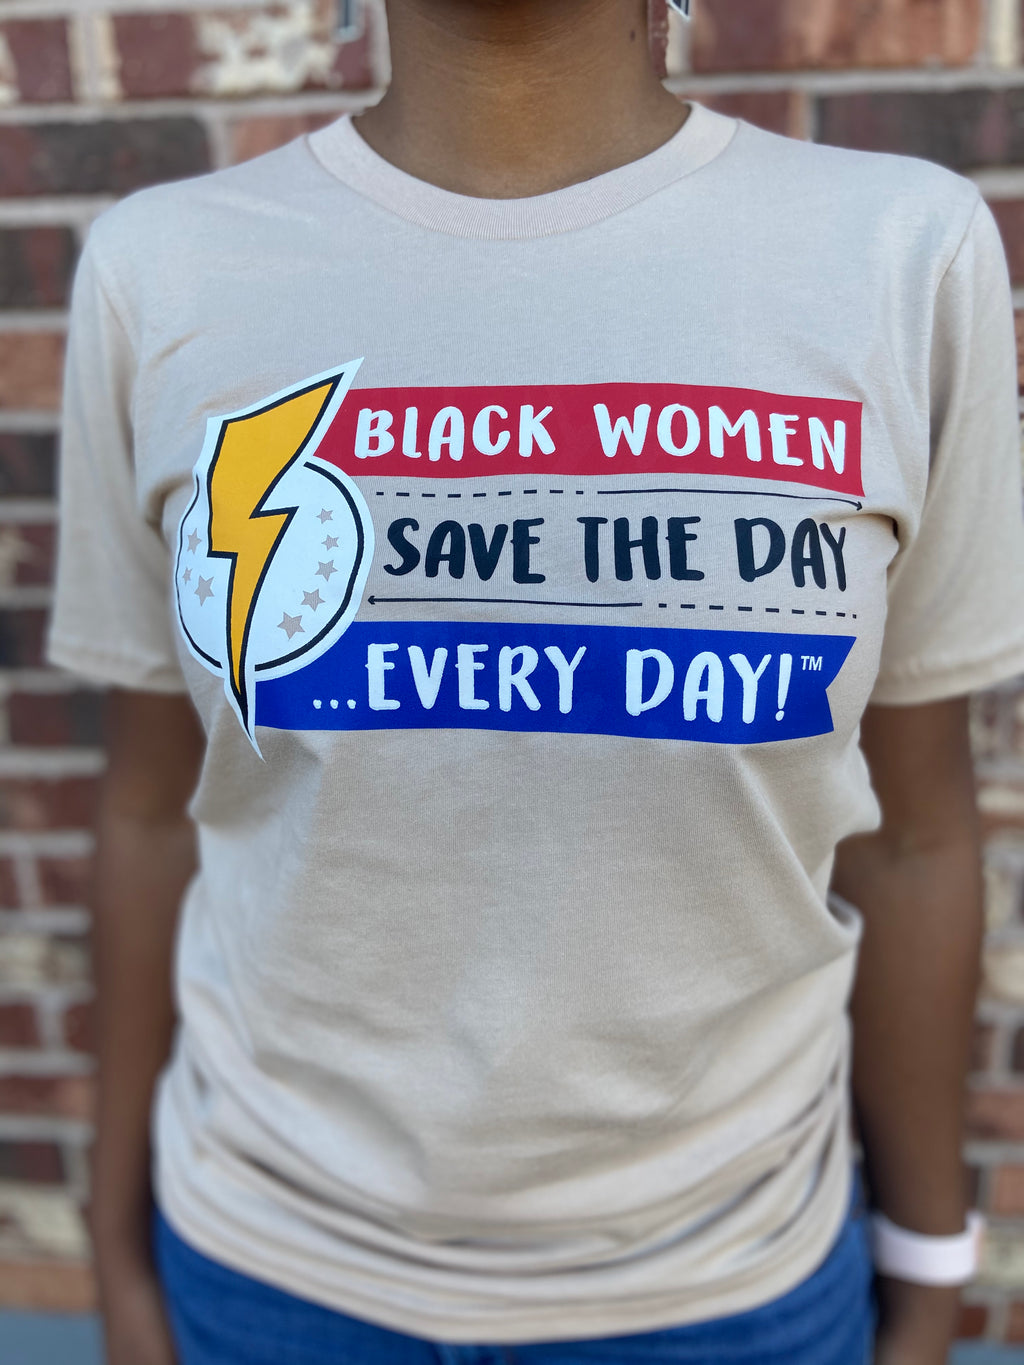 Black Women Save the Day Every Day Short Sleeve T-Shirt (Tan)